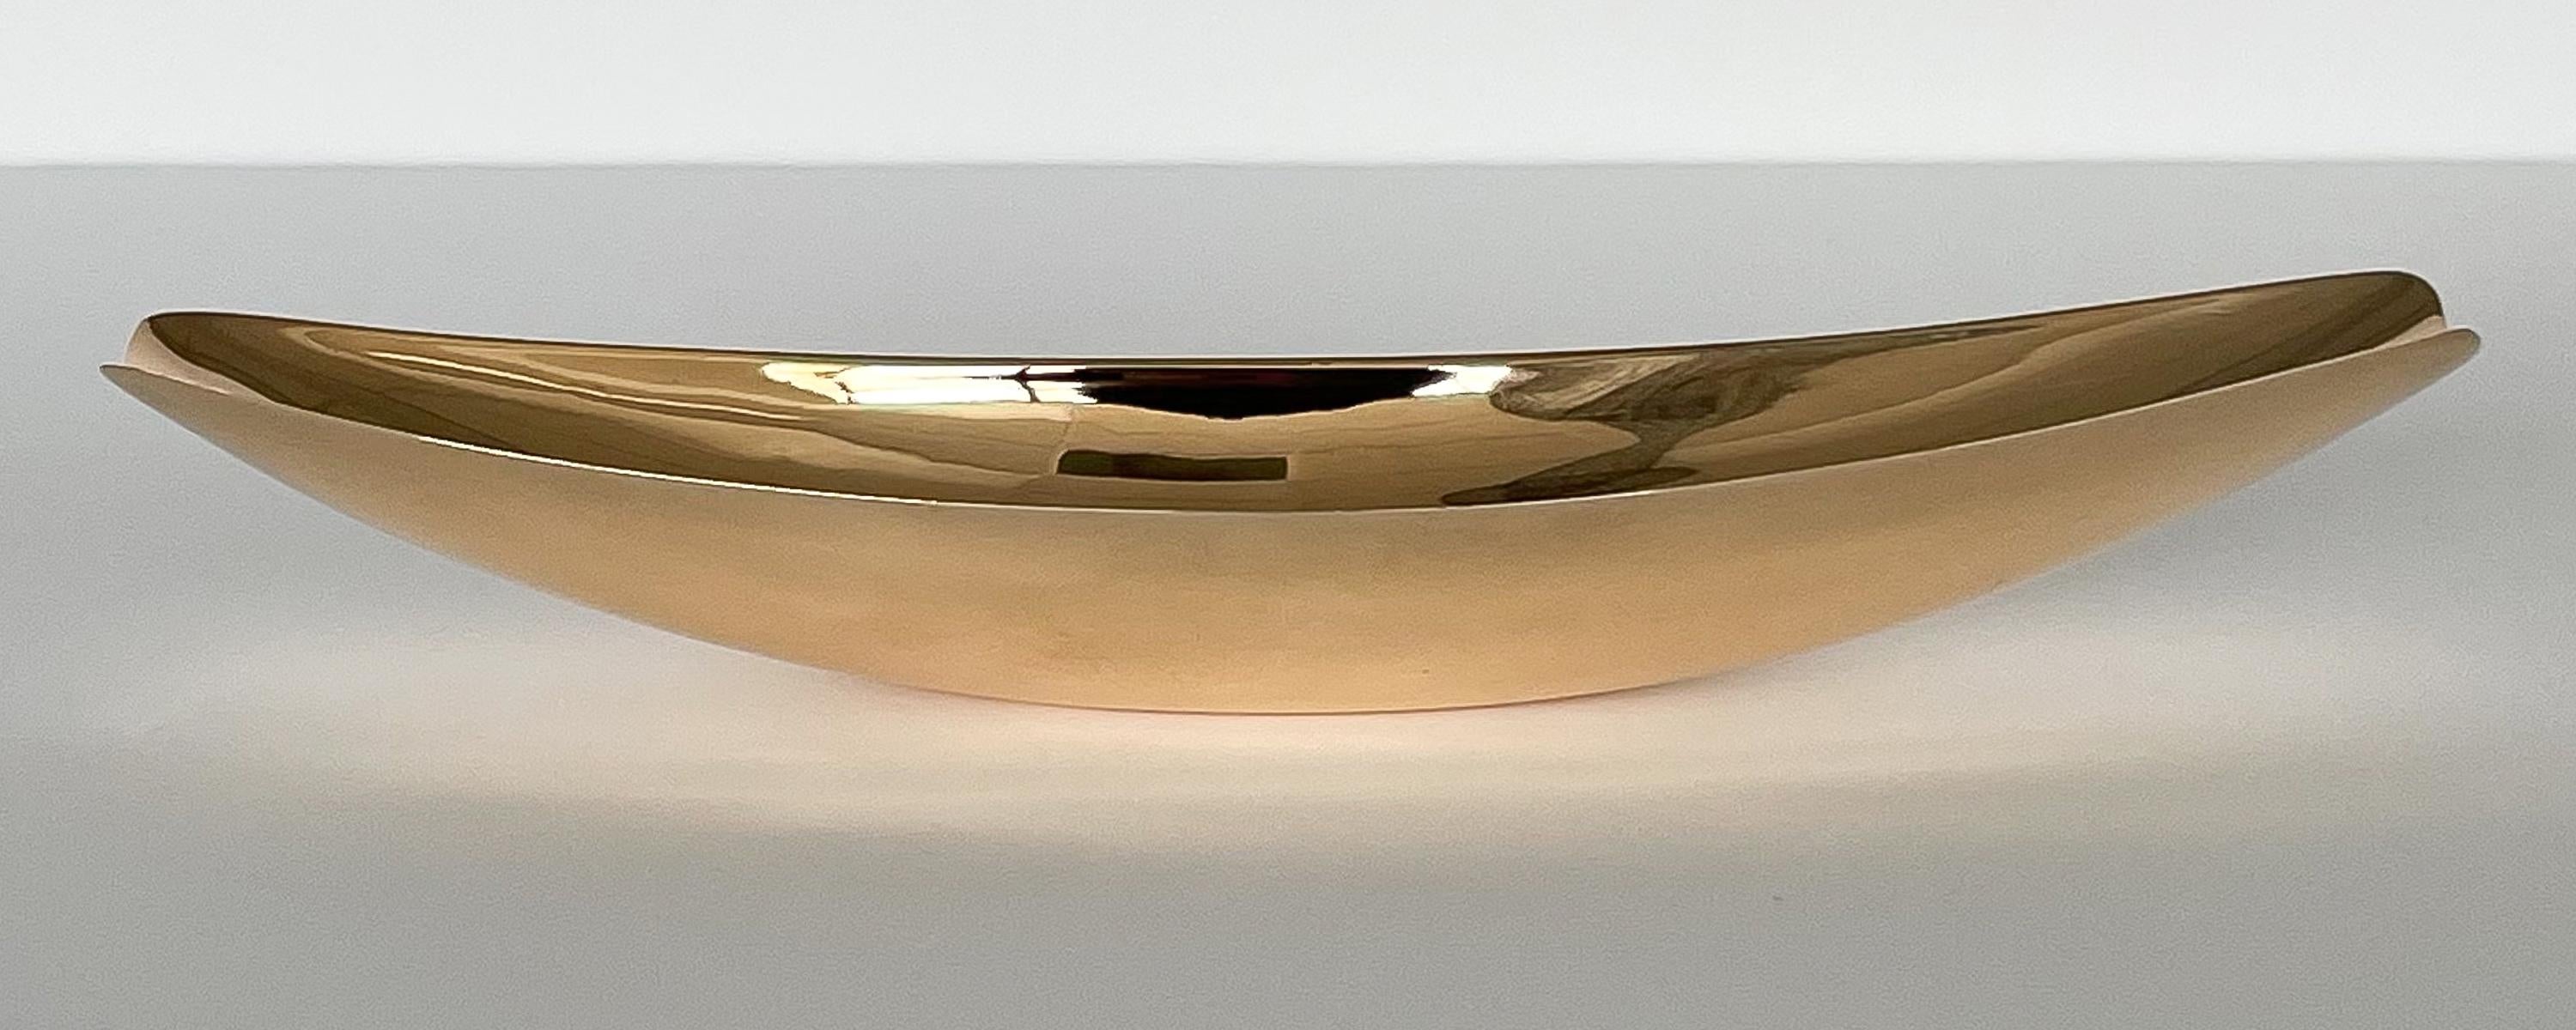 Modernist polished bronze dish by Ronald Hayes Pearson and John Prip for Metal Arts Company, Rochester NY, circa 1950s. Solid polished bronze. Narrow dish with tapered / scooped ends. Marked MA Co. Bronze, Rochester, NY. Measures 2